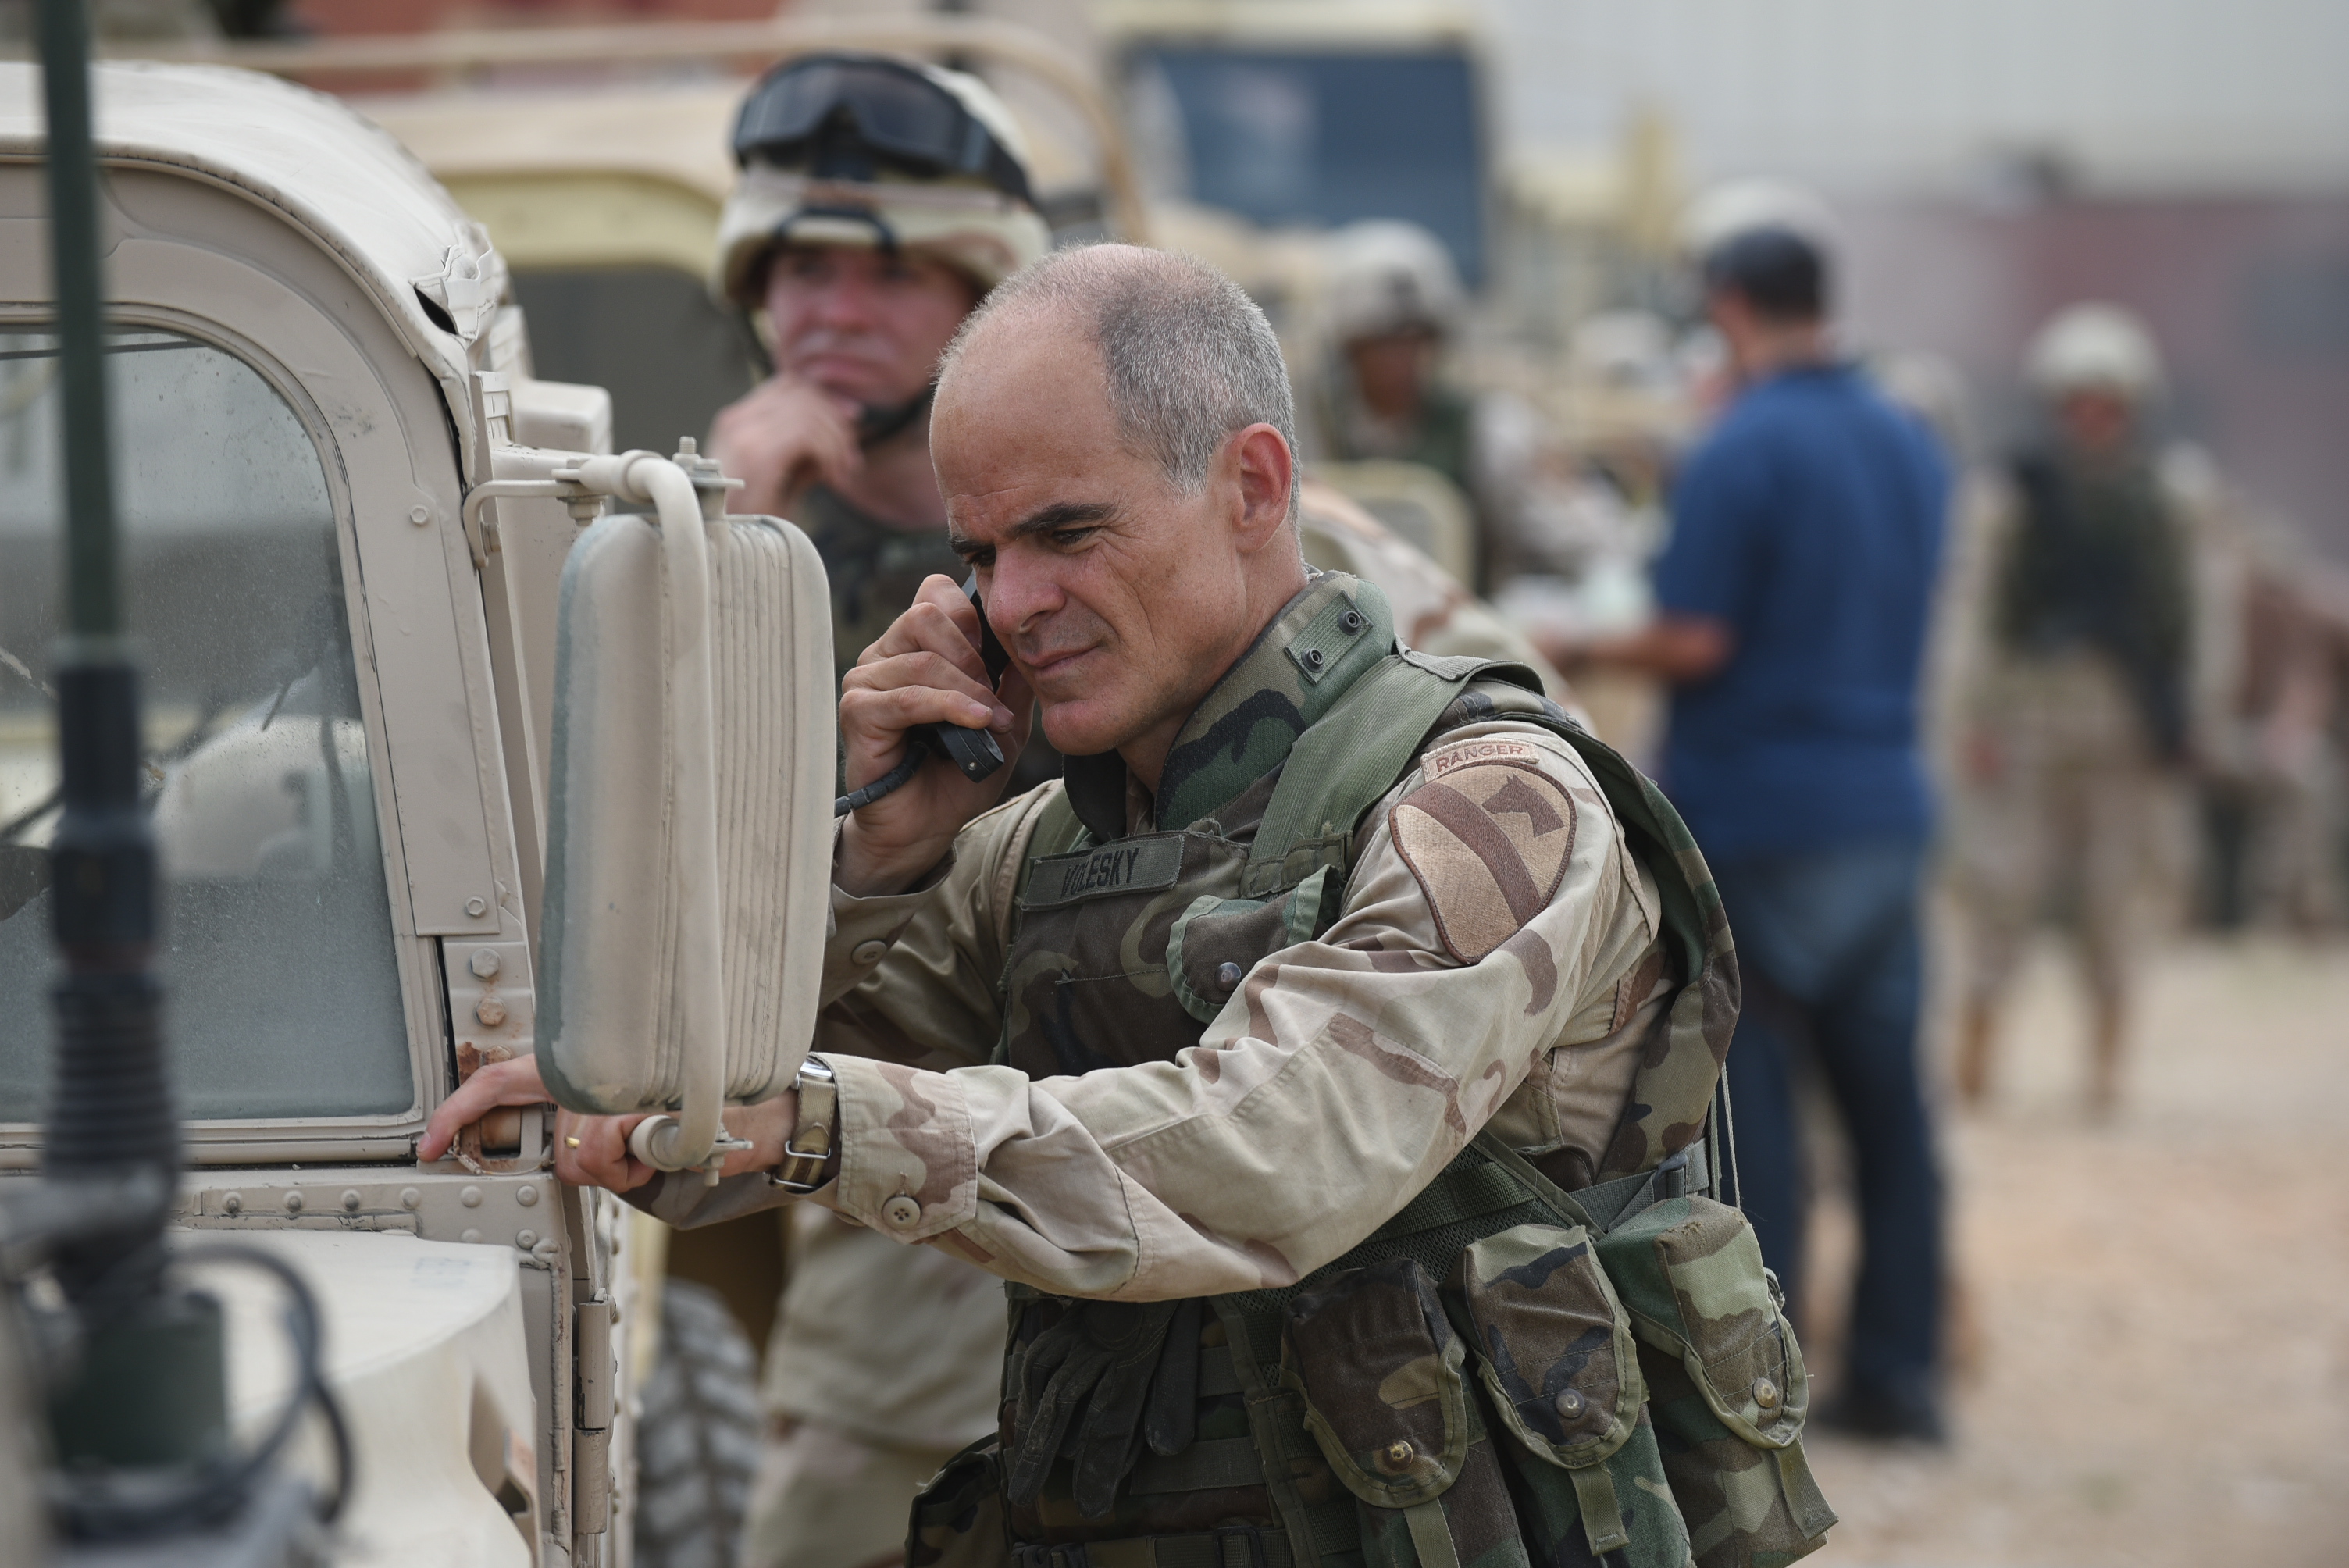 Fort Hood, TX -
Michael Kelly portrays Lt. Col. Gary Volesky on set of The Long Road Home at U.S. Military post, Fort Hood, Killeen, Texas. (Photo: National Geographic/Van Redin)